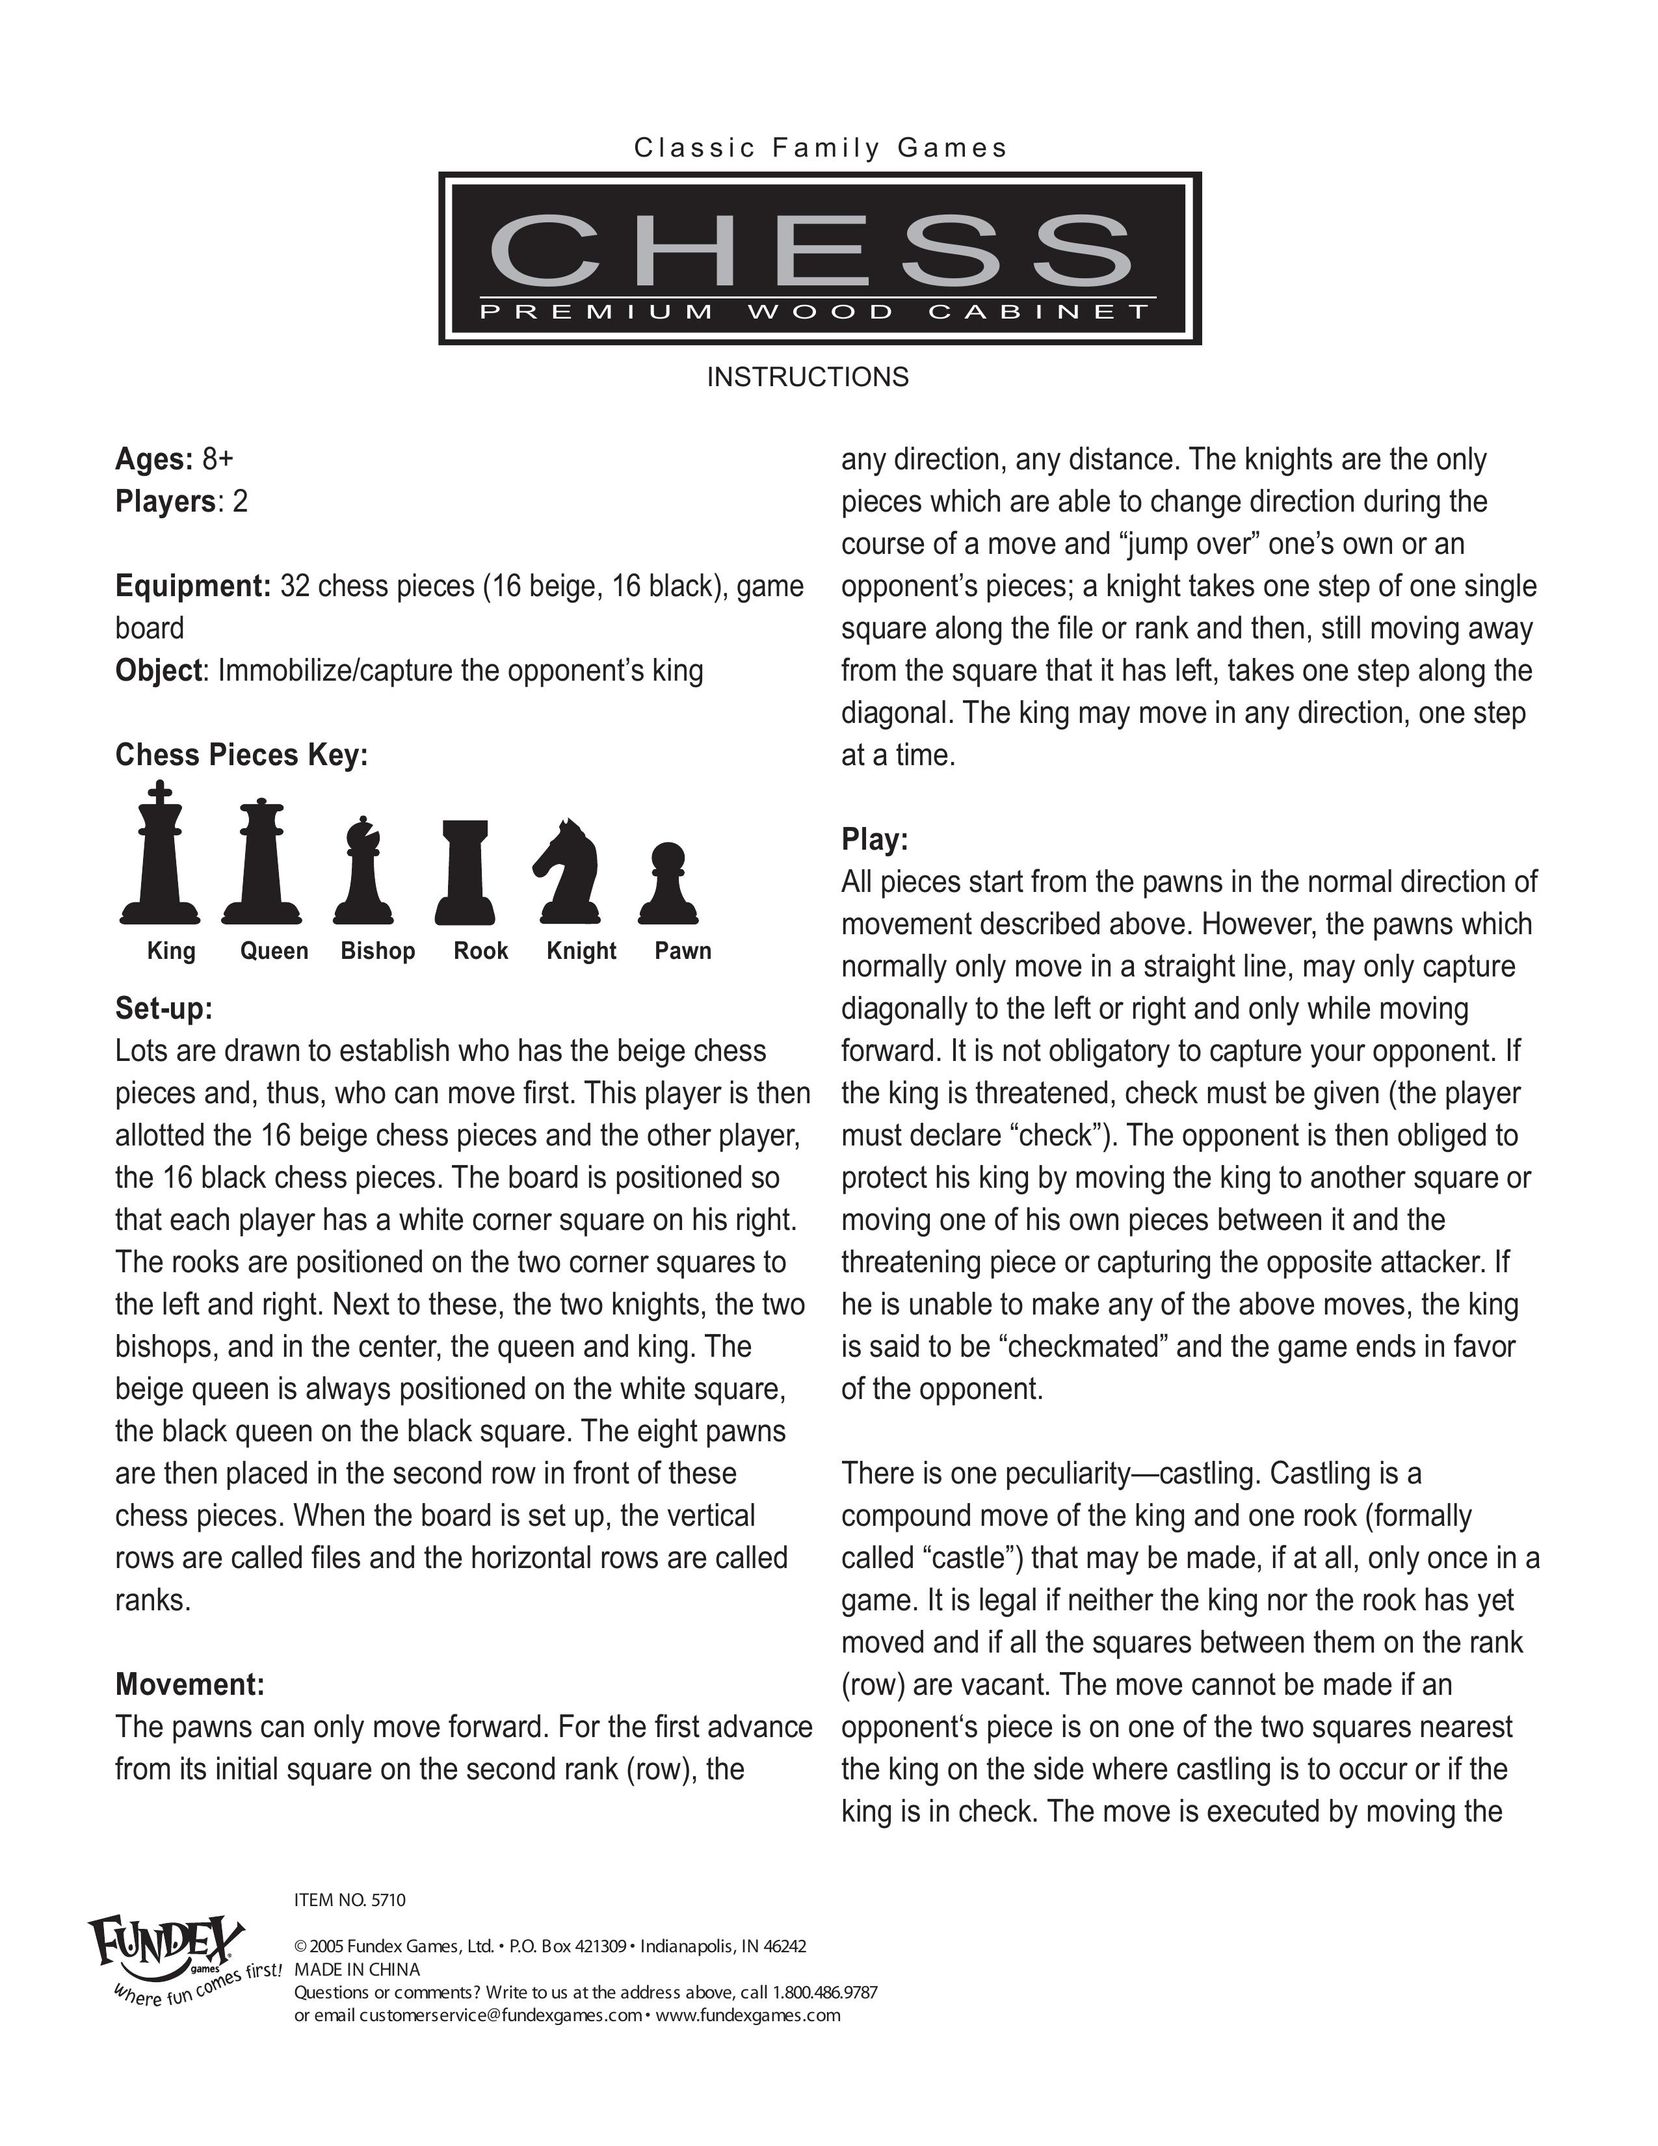 Fundex Games Chess Board Games User Manual